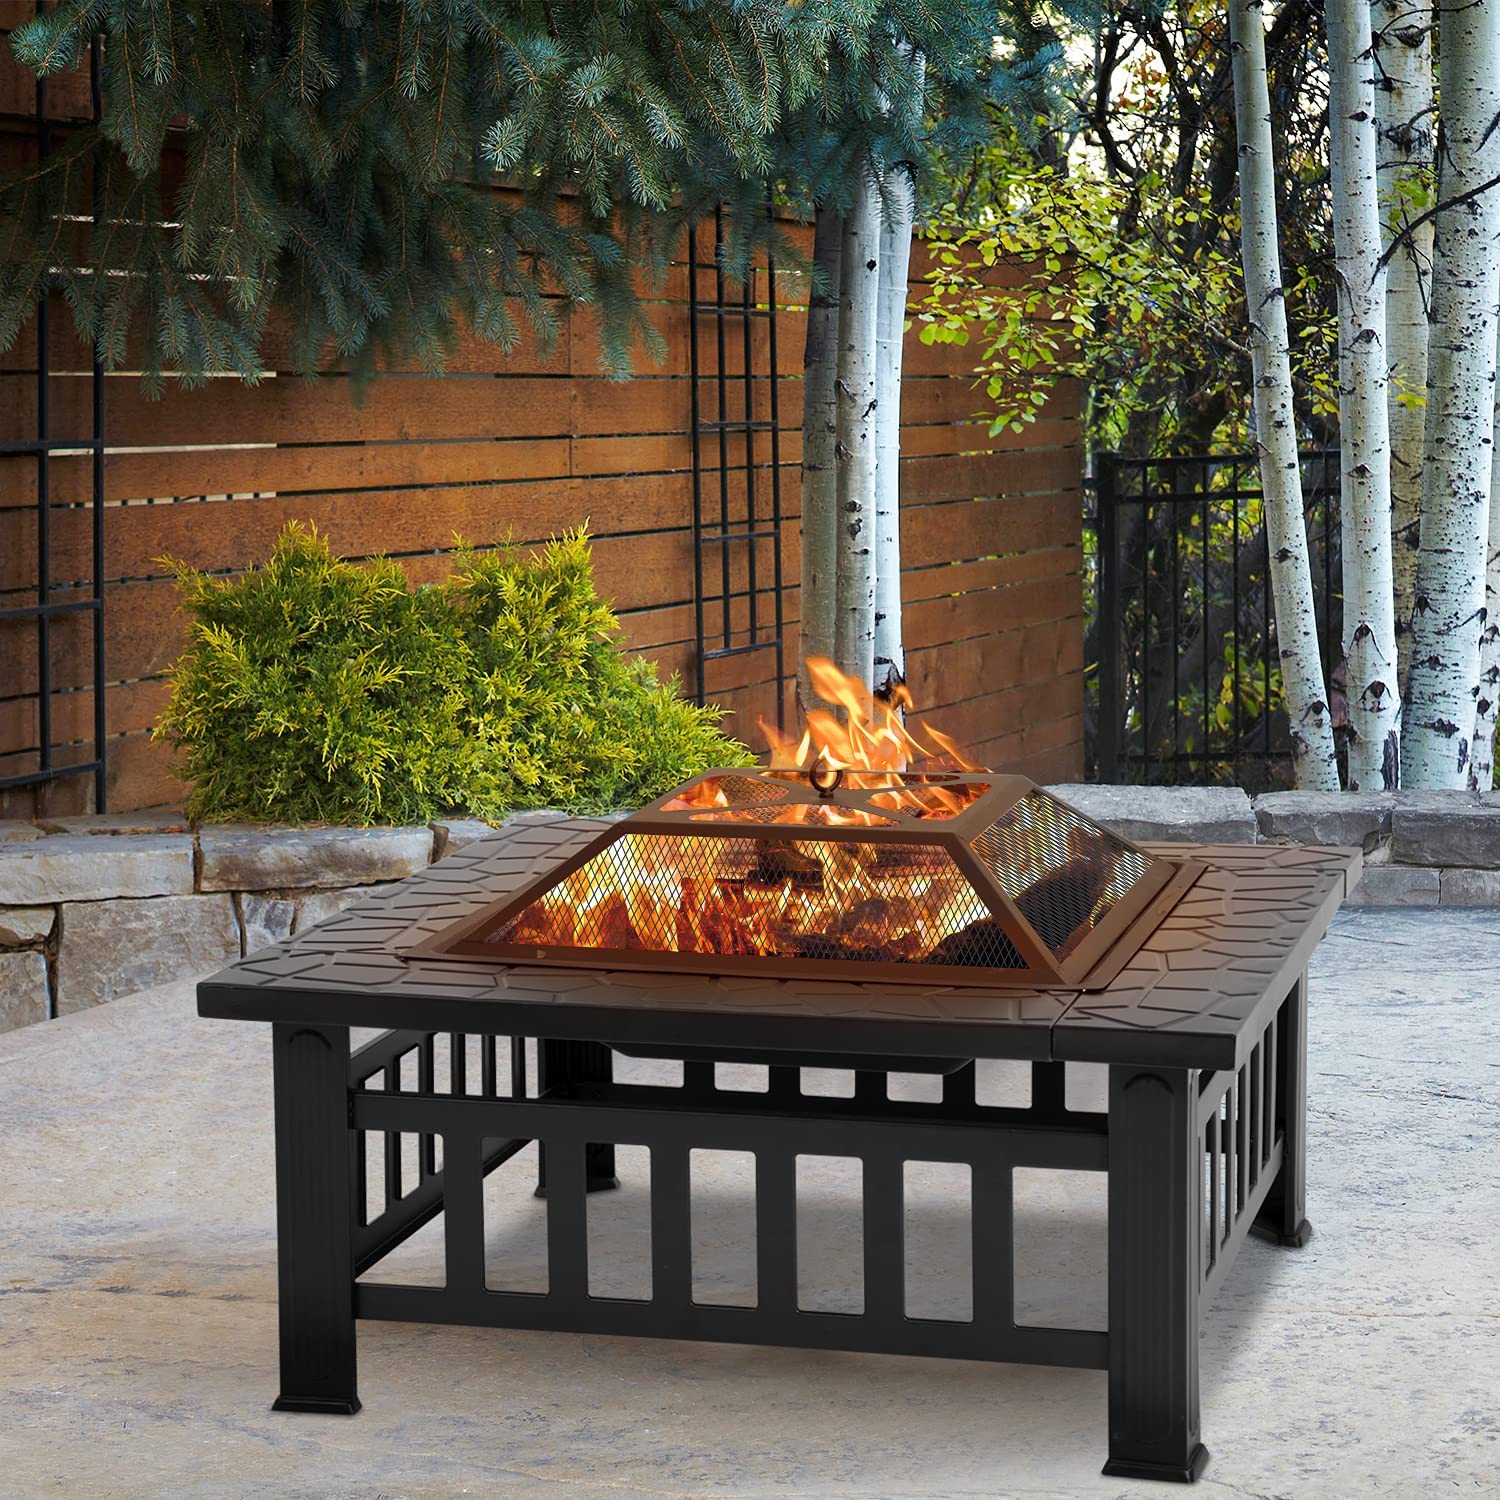 FDW 32" Outdoor Metal firepit for Patio Wood Burning Fireplace Square Garden Stove with Charcoal Rack, Poker & Mesh Cover for Camping - image 1 of 7